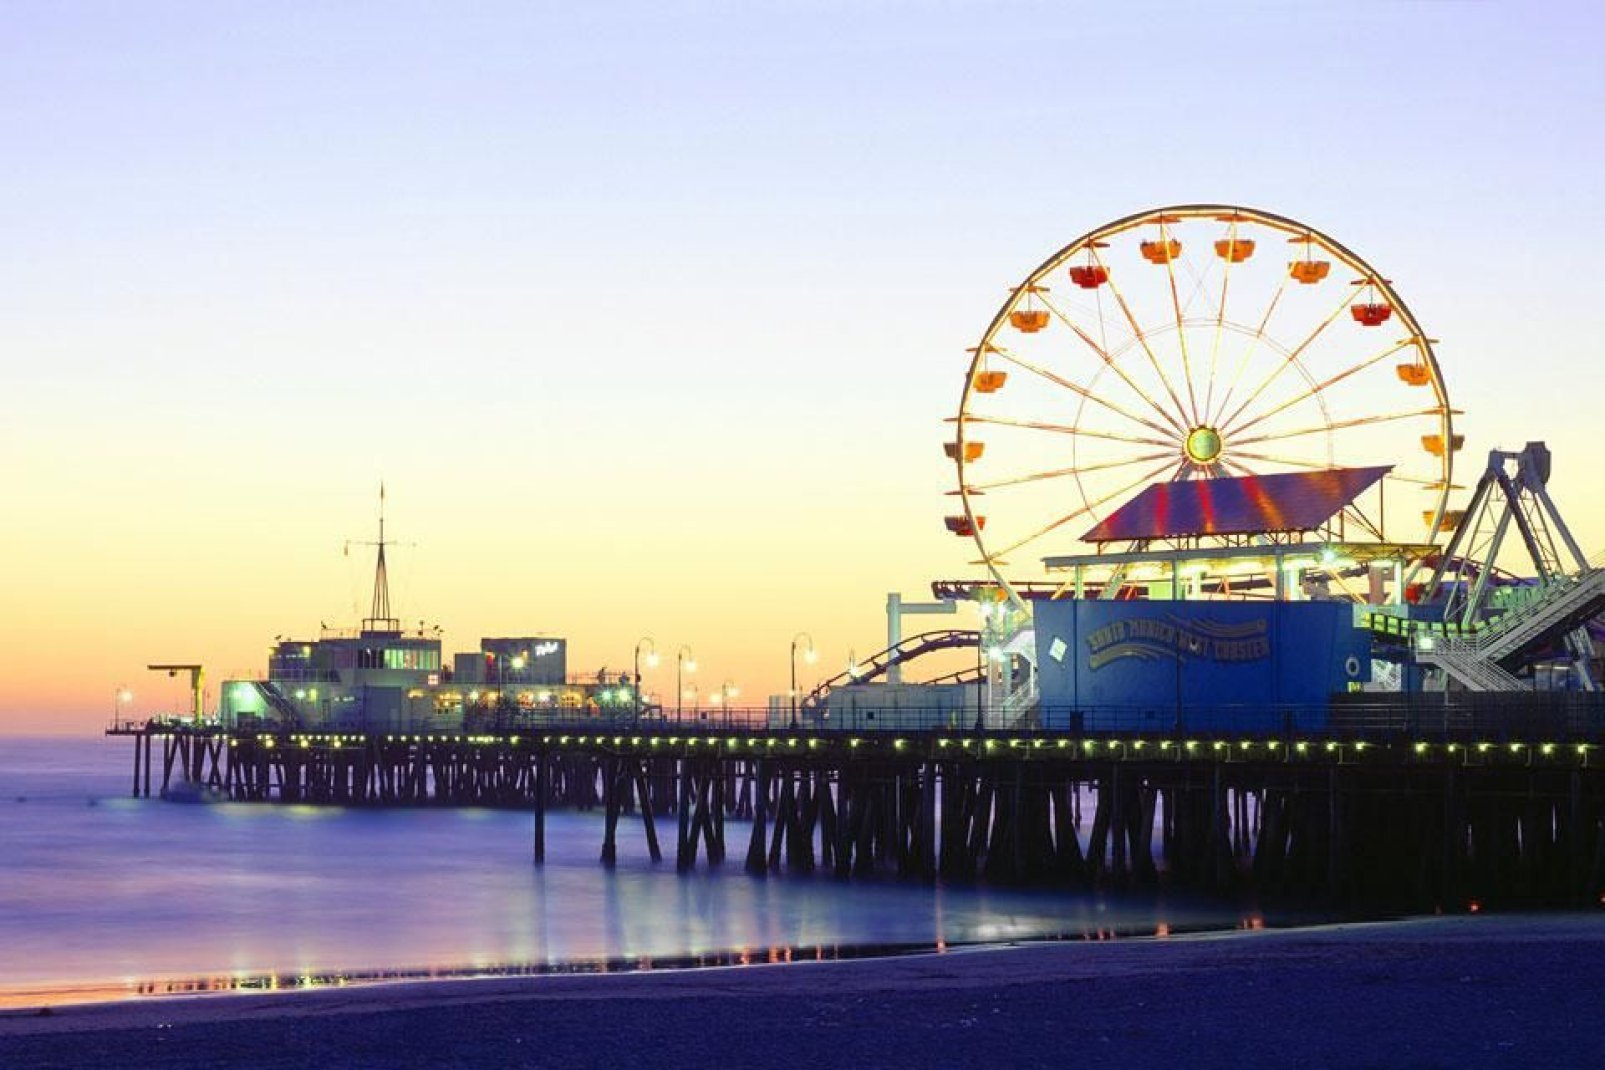 Partly because of its agreeable climate, Santa Monica had become a famed resort town by the early 20th century.